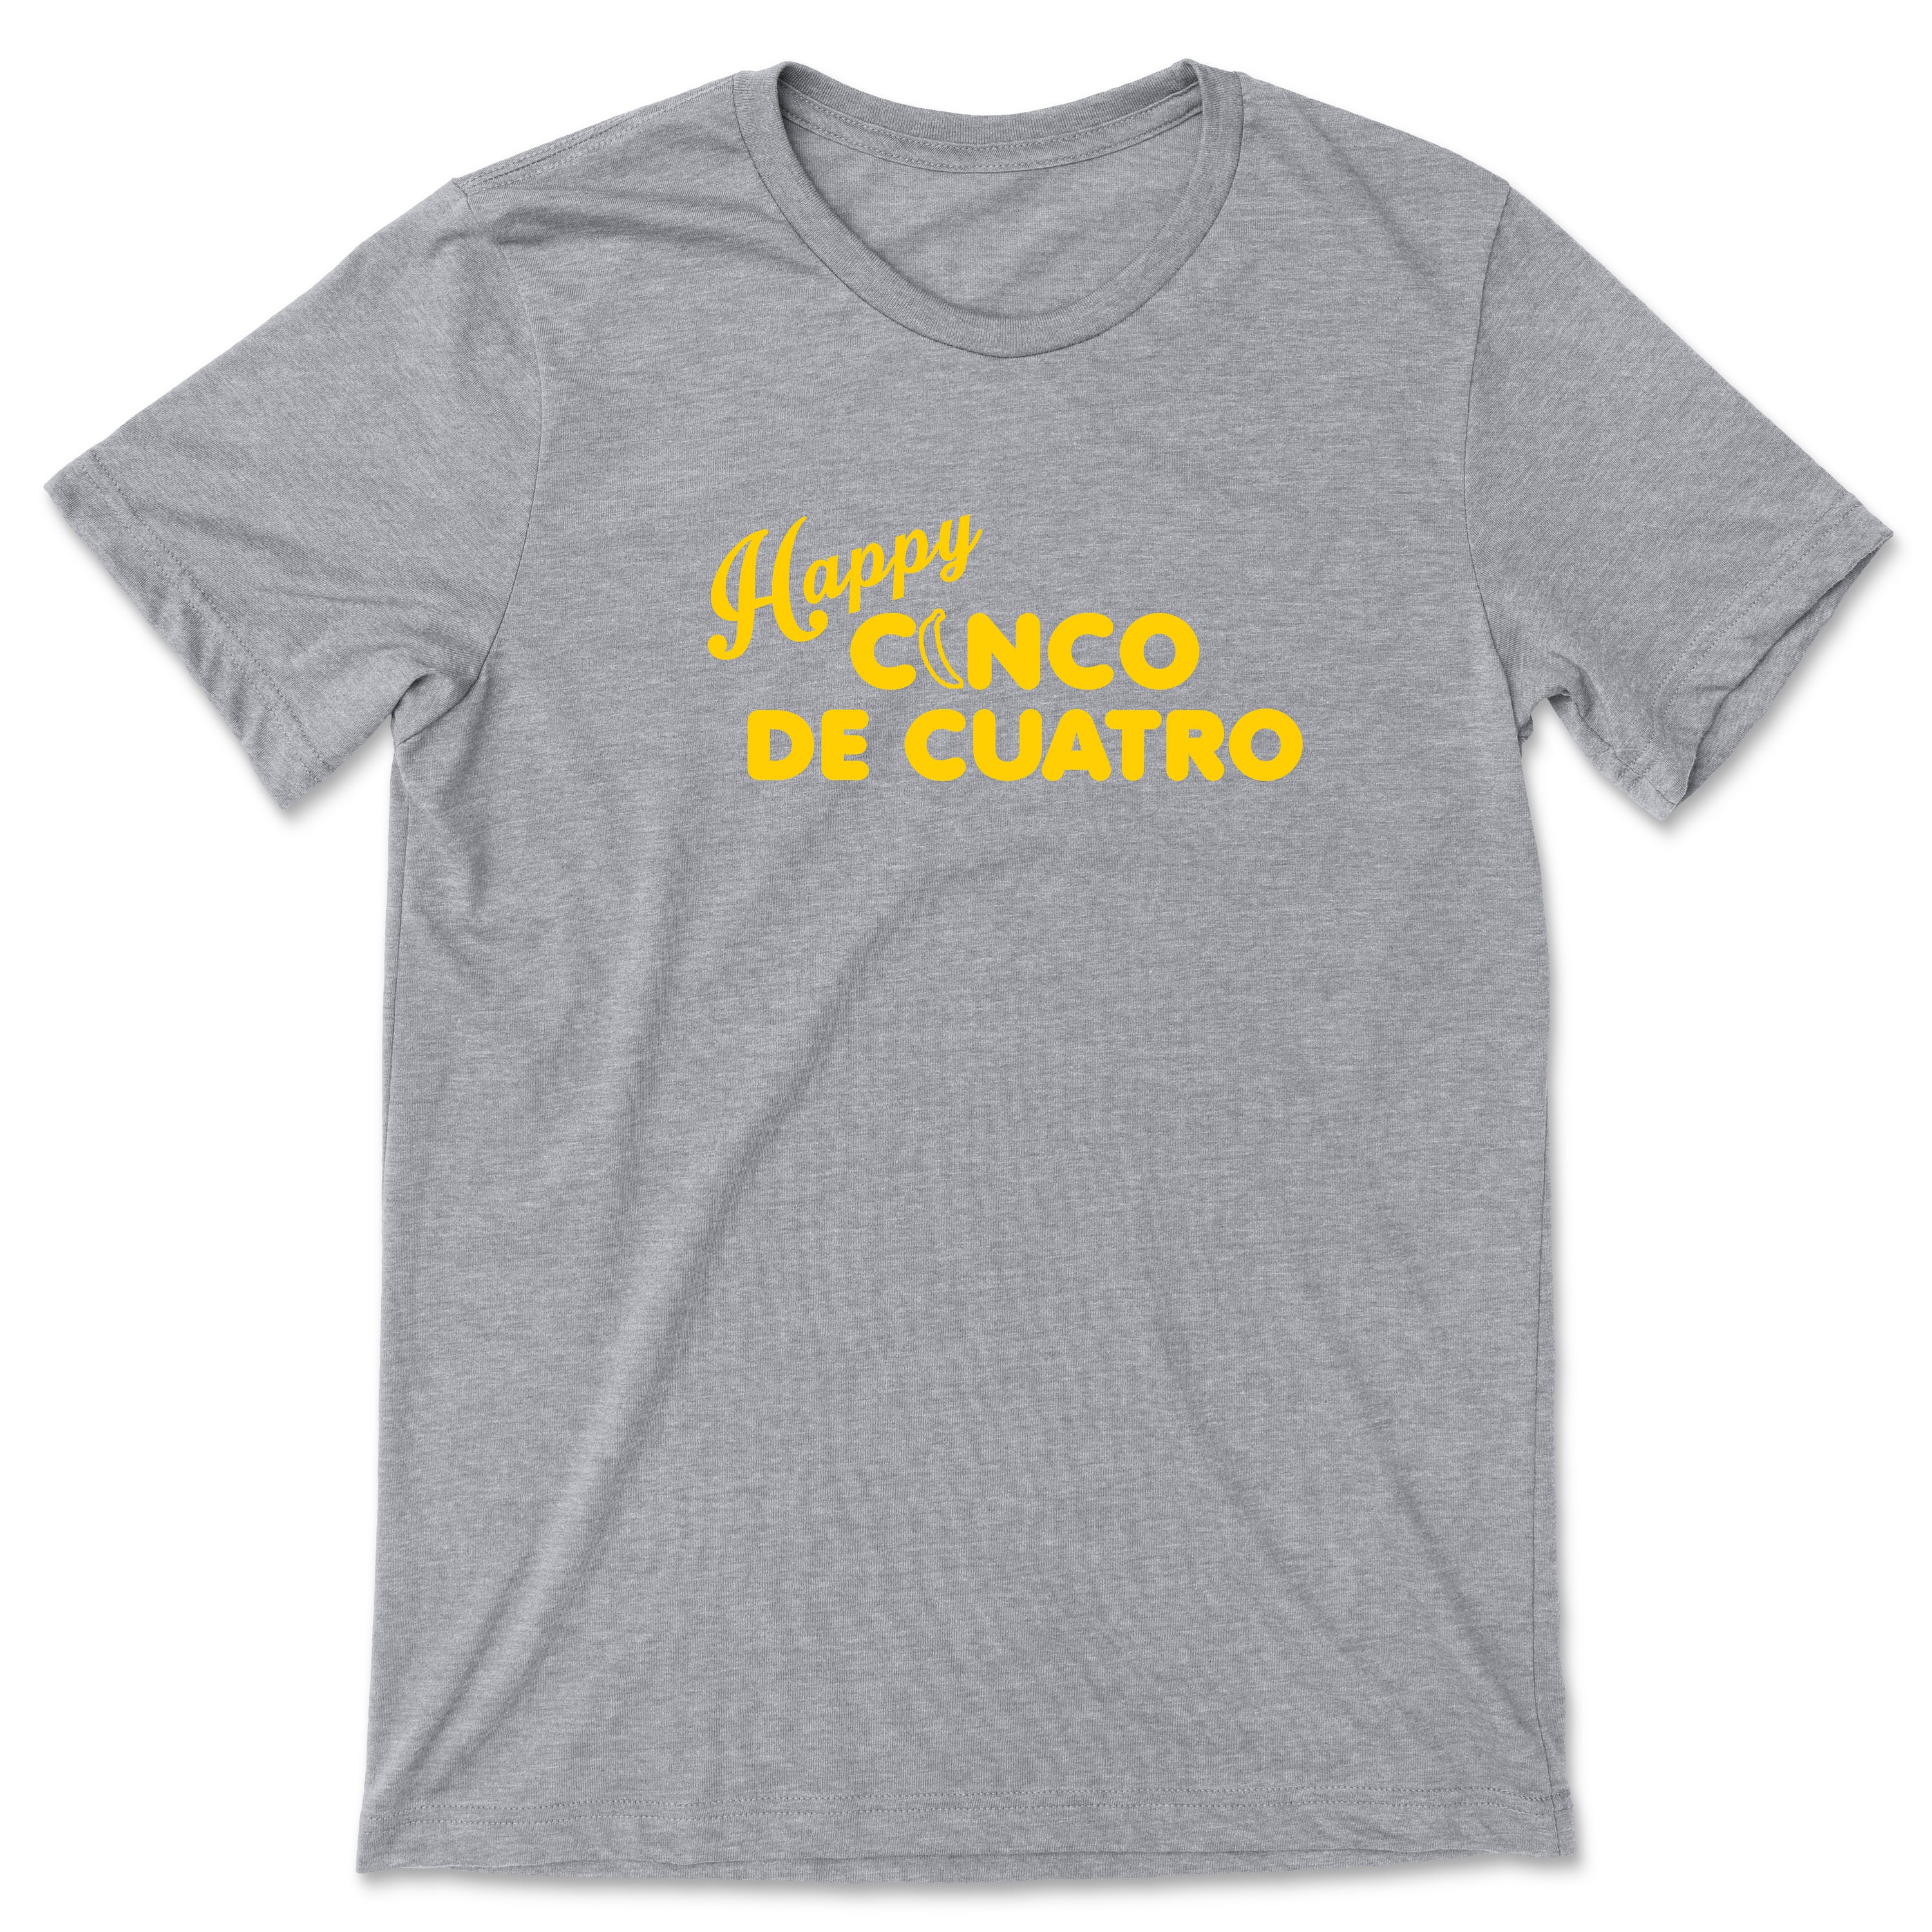 Happy Cinco de Cuatro T-Shirt Inspired by Lucille Bluth | Etsy